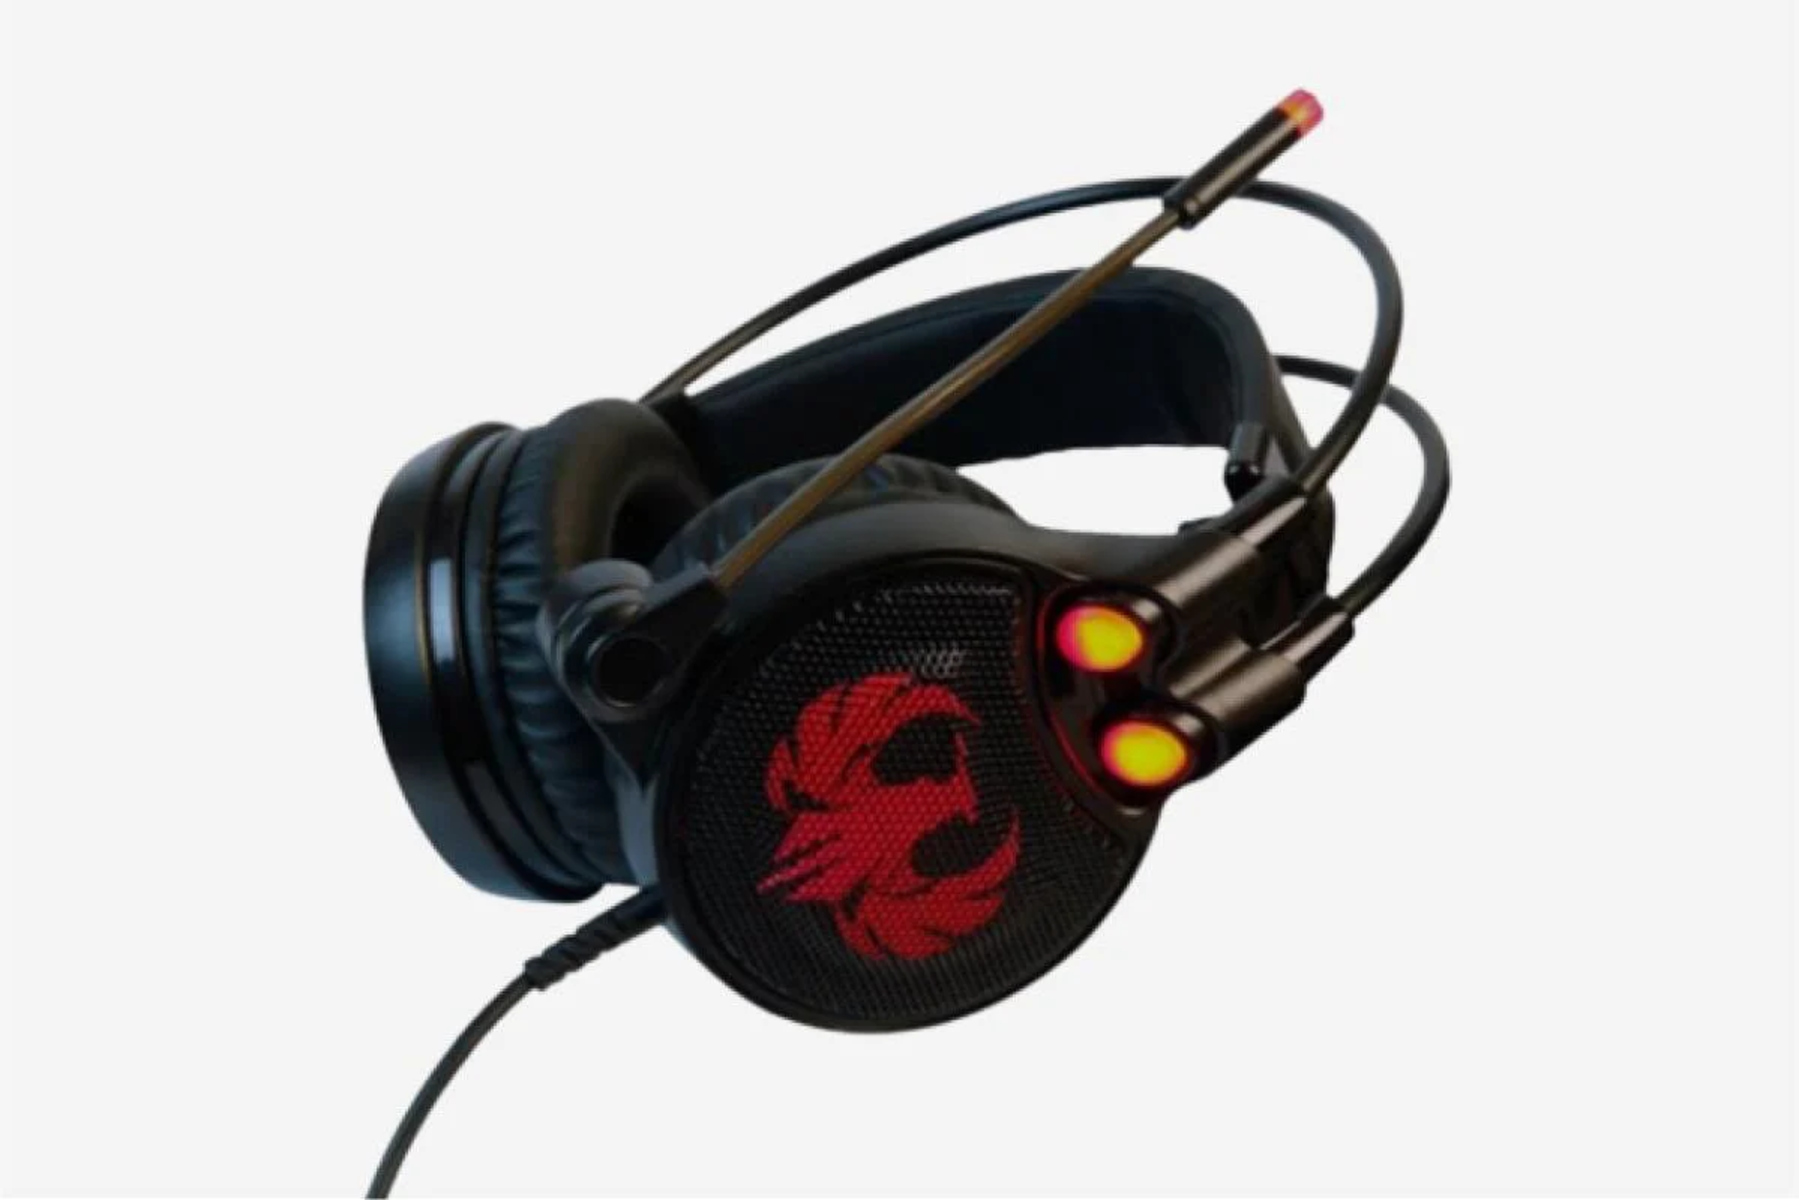 Which Sades Gaming Headset Has The Best Microphone And Audio Quality